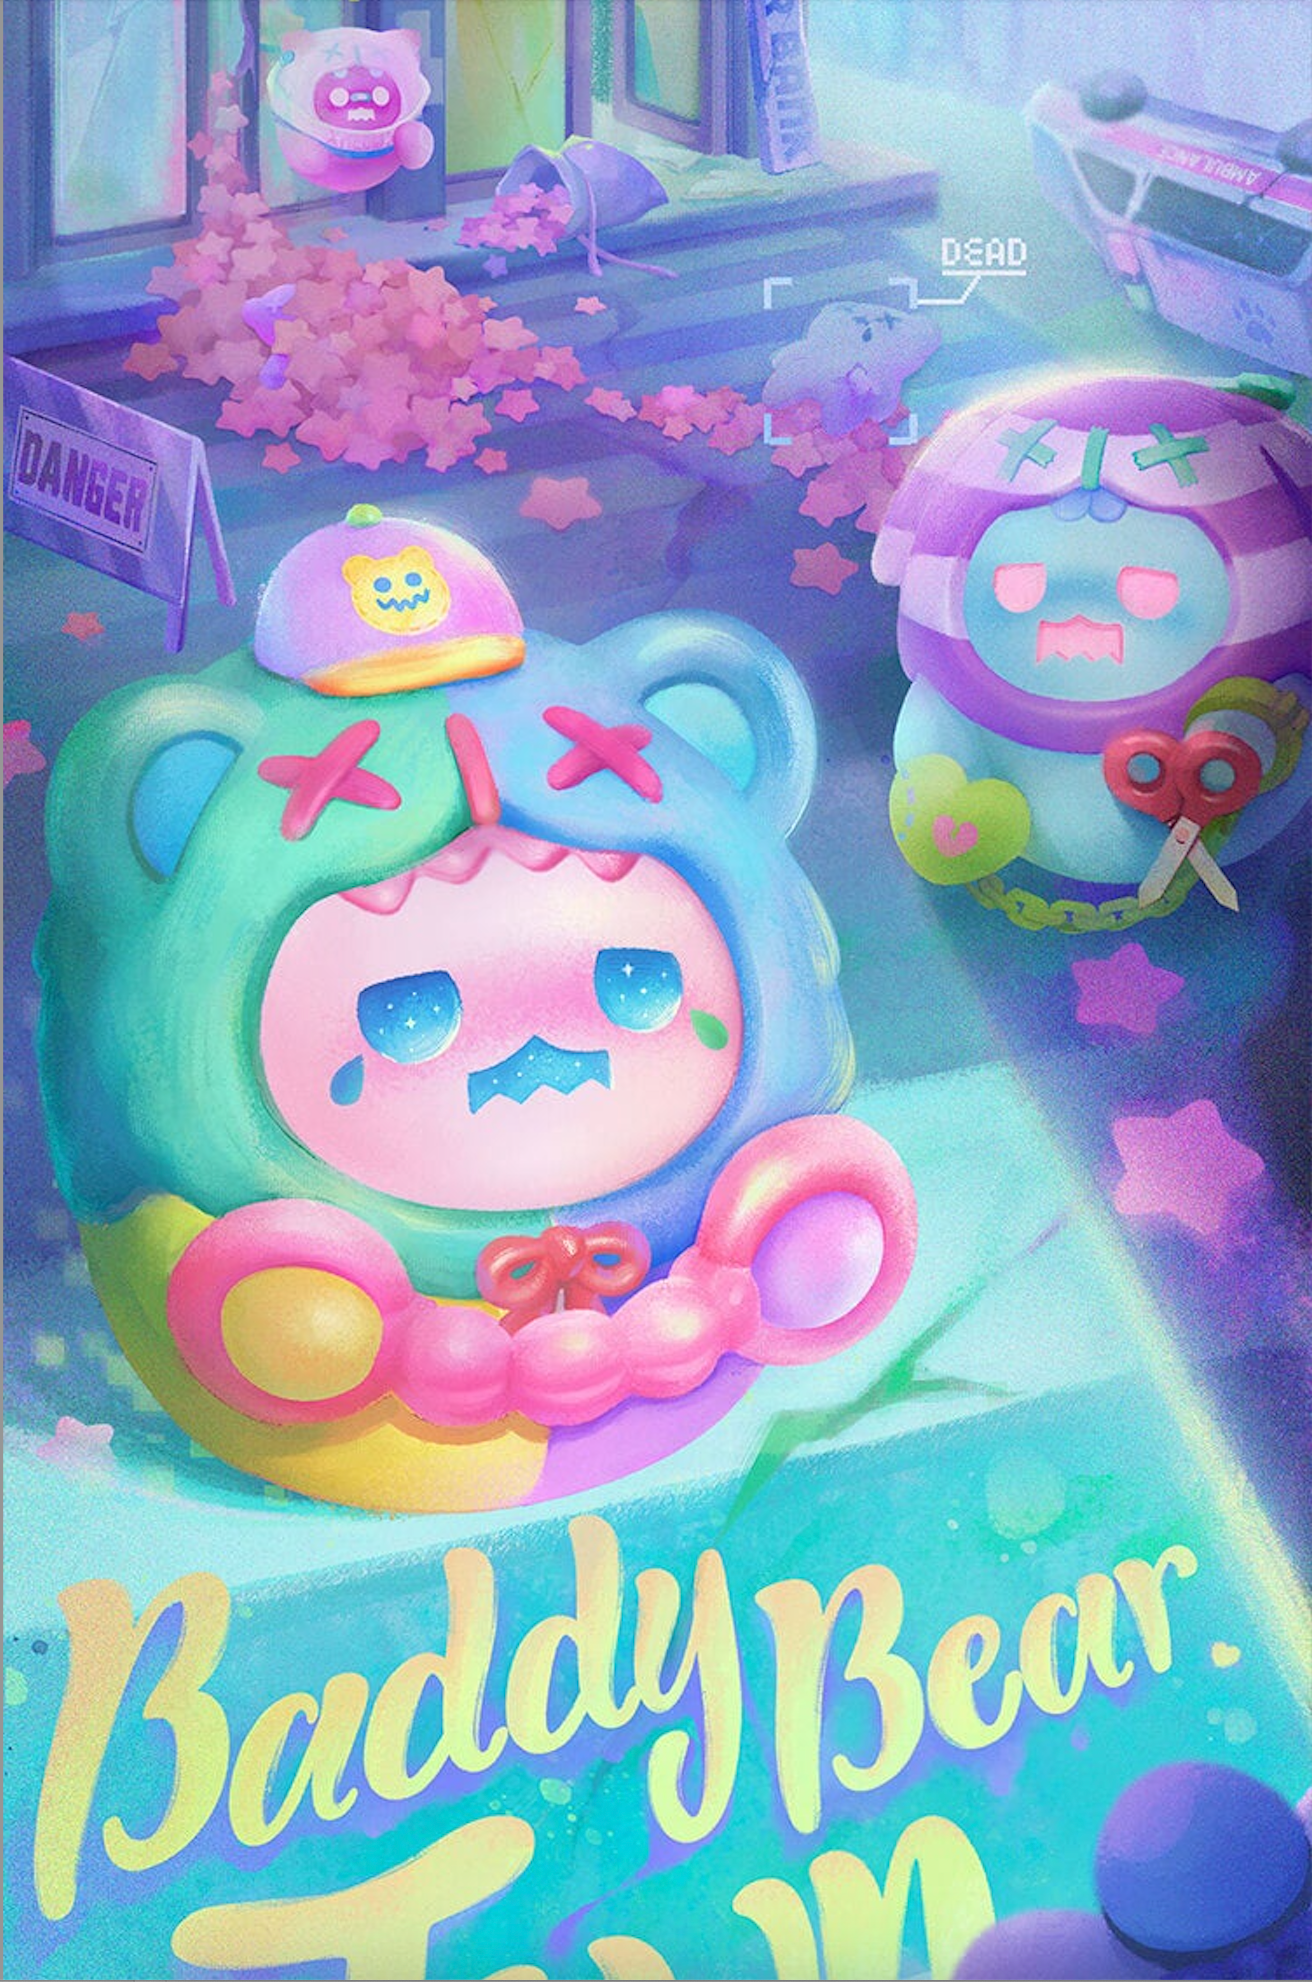 Embracing Love, Loneliness, and Mischief: Journeying Through the Mystical Realms of ShinWoo Ghost Bears in the Baddy Bear Town